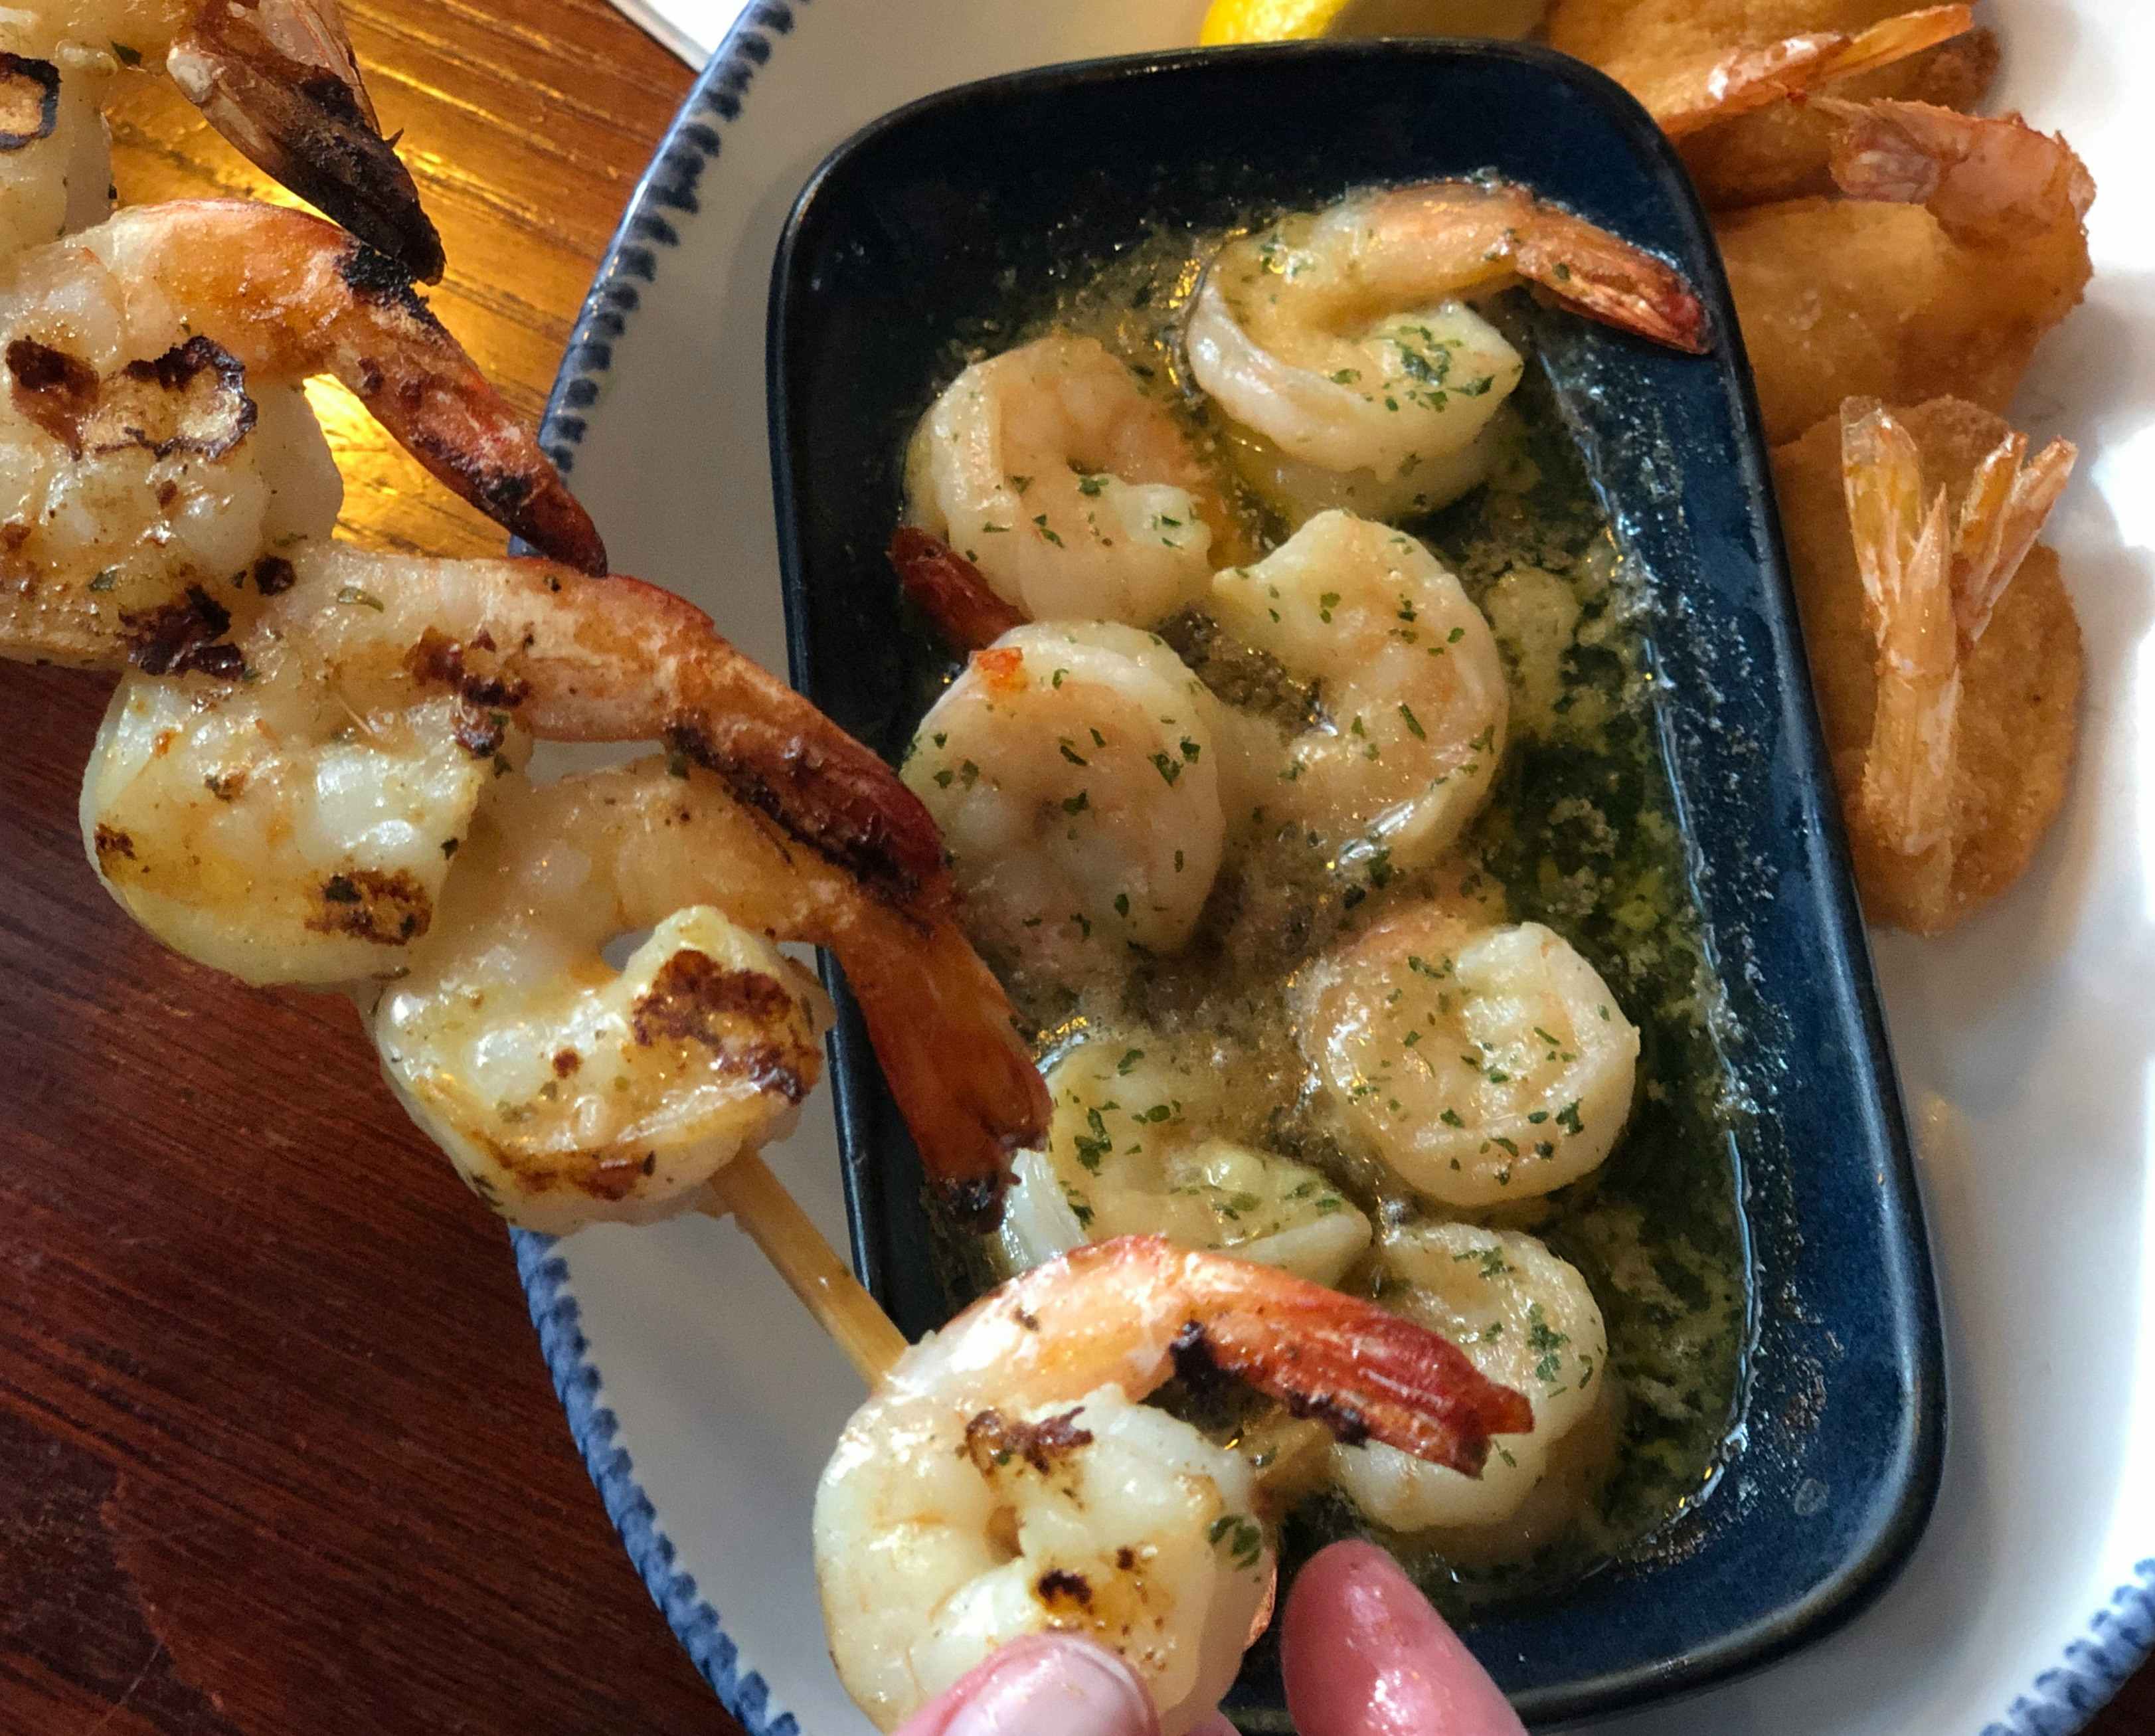 A person's fingers taking a shrimp from a skewer of grilled shrimp held over a plate with Garlic Shrimp Scampi and Walt's Favorite Shrimp at Red Lobster.